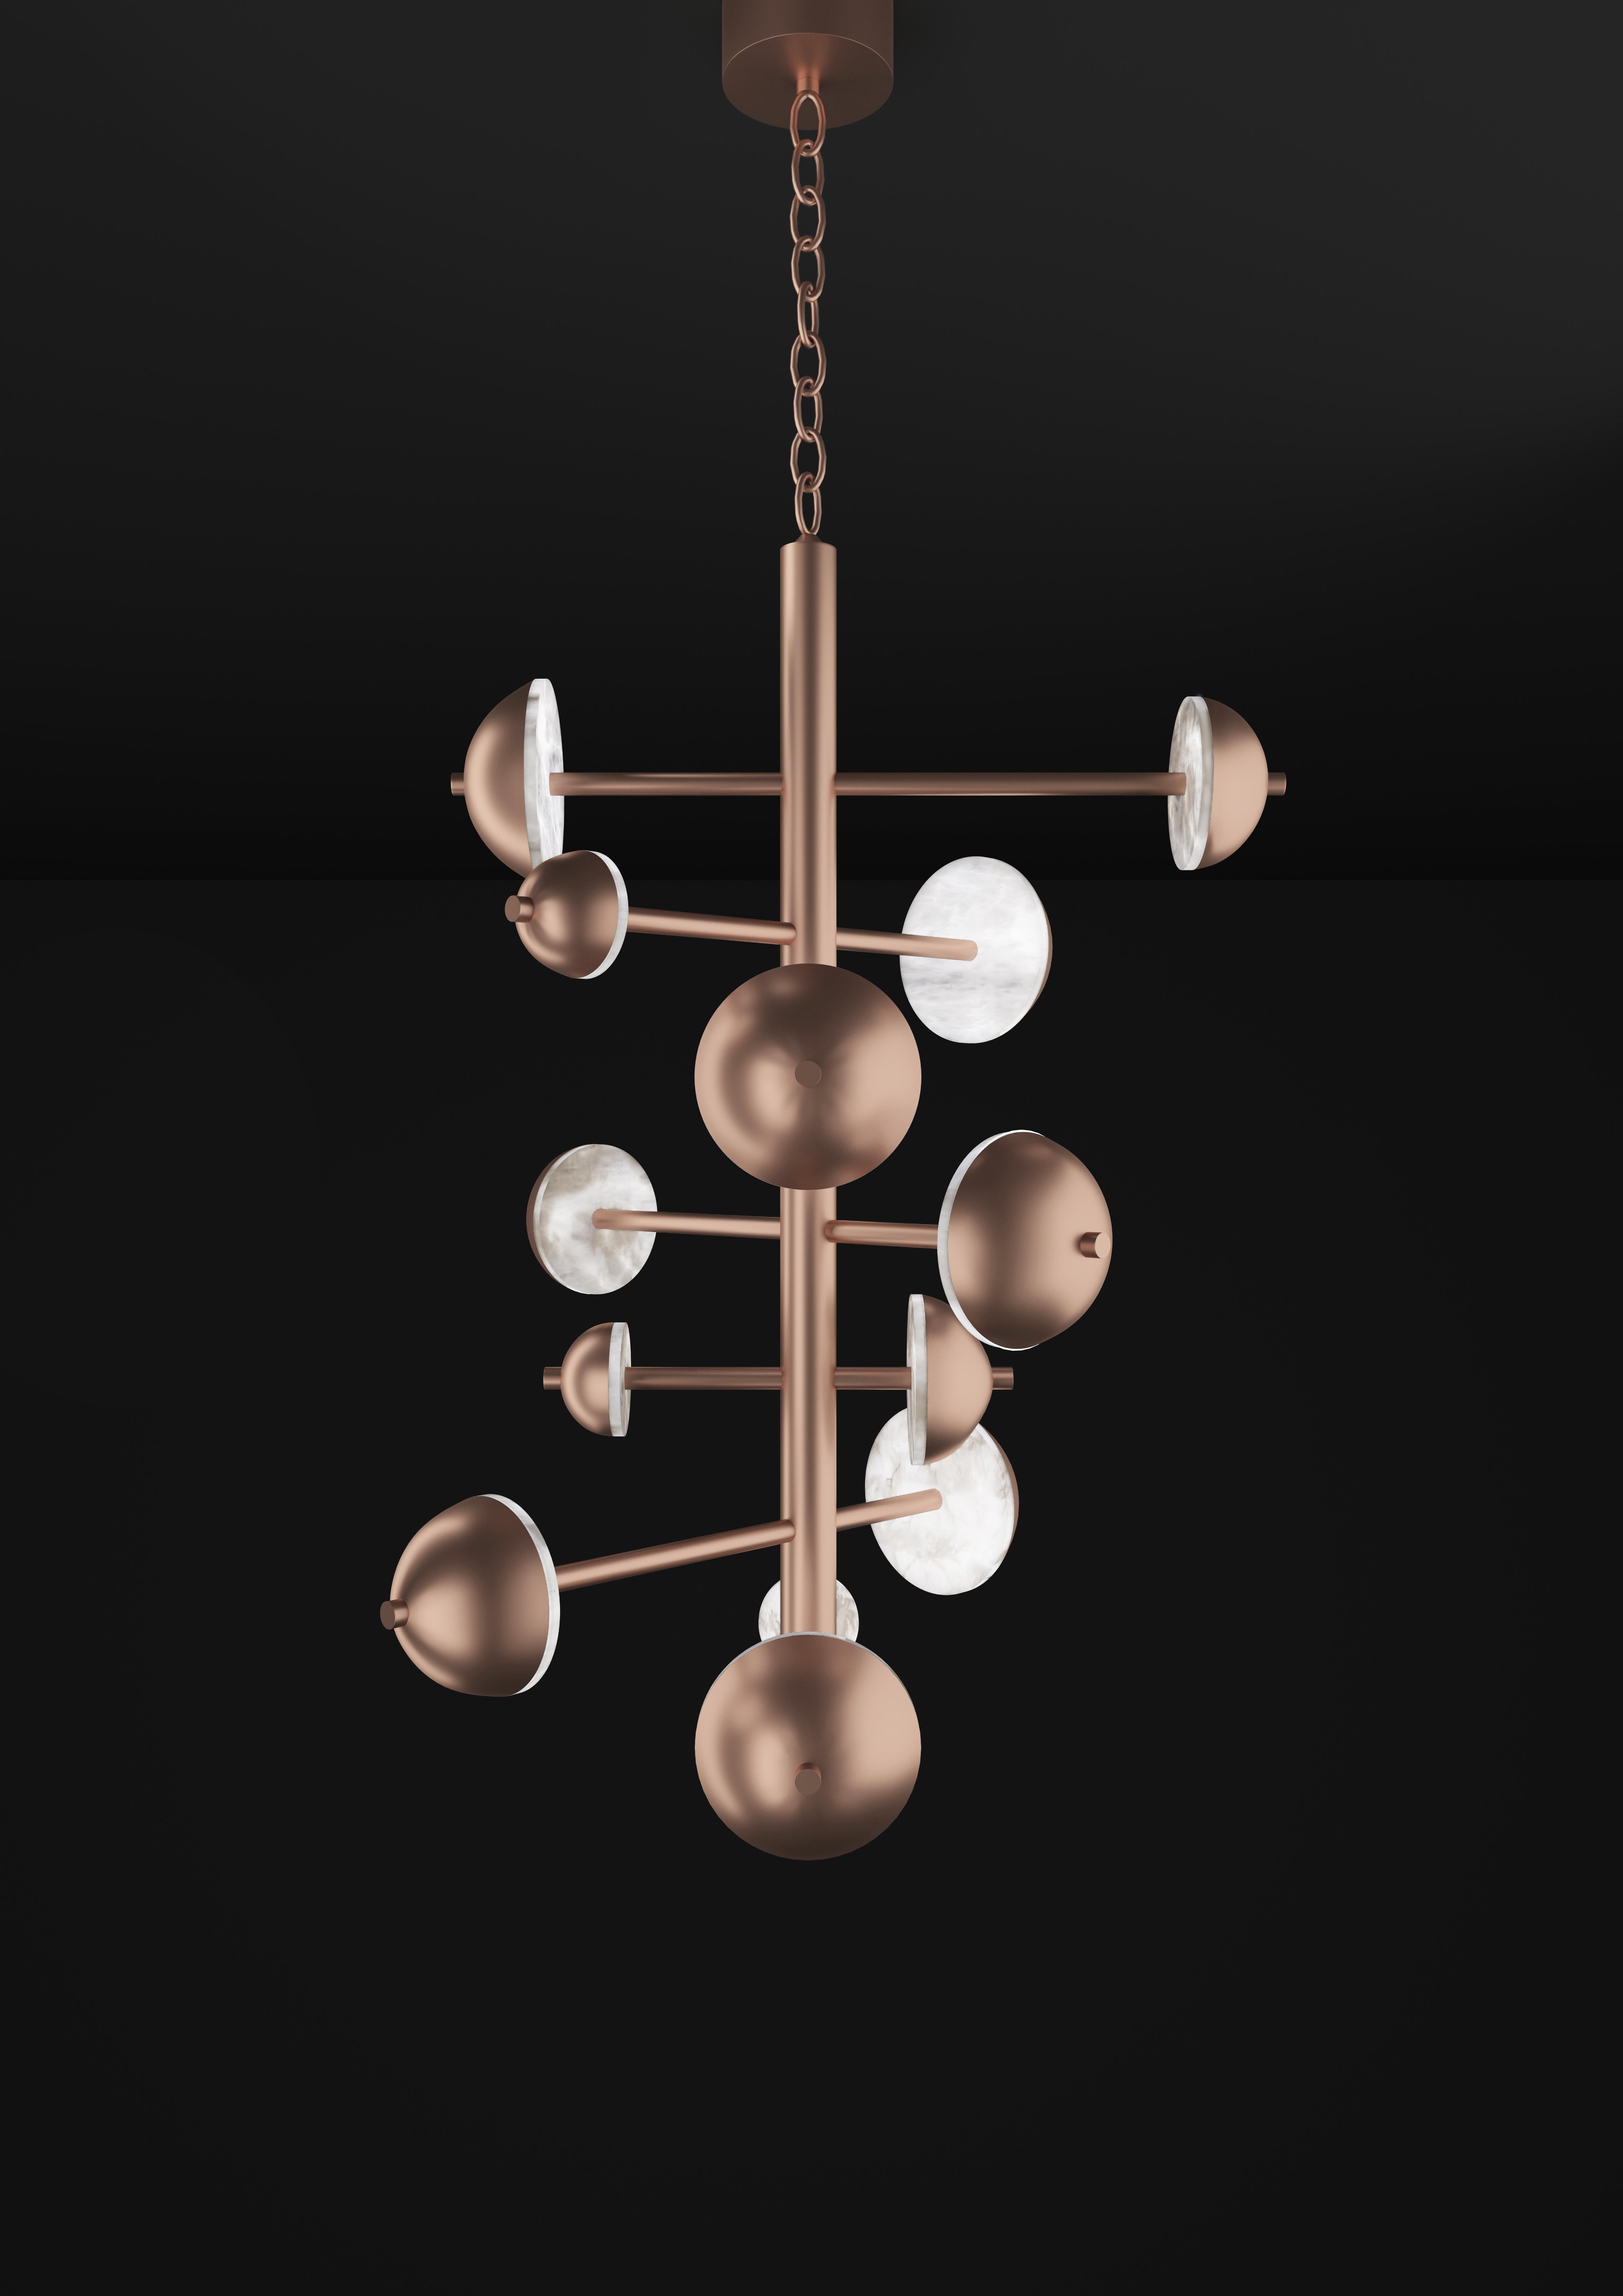 Ares Copper Chandelier by Alabastro Italiano
Dimensions: D 74,5 x W 73 x H 110 cm.
Materials: White alabaster and copper.

Available in different finishes: Shiny Silver, Bronze, Brushed Brass, Ruggine of Florence, Brushed Burnished, Shiny Gold,